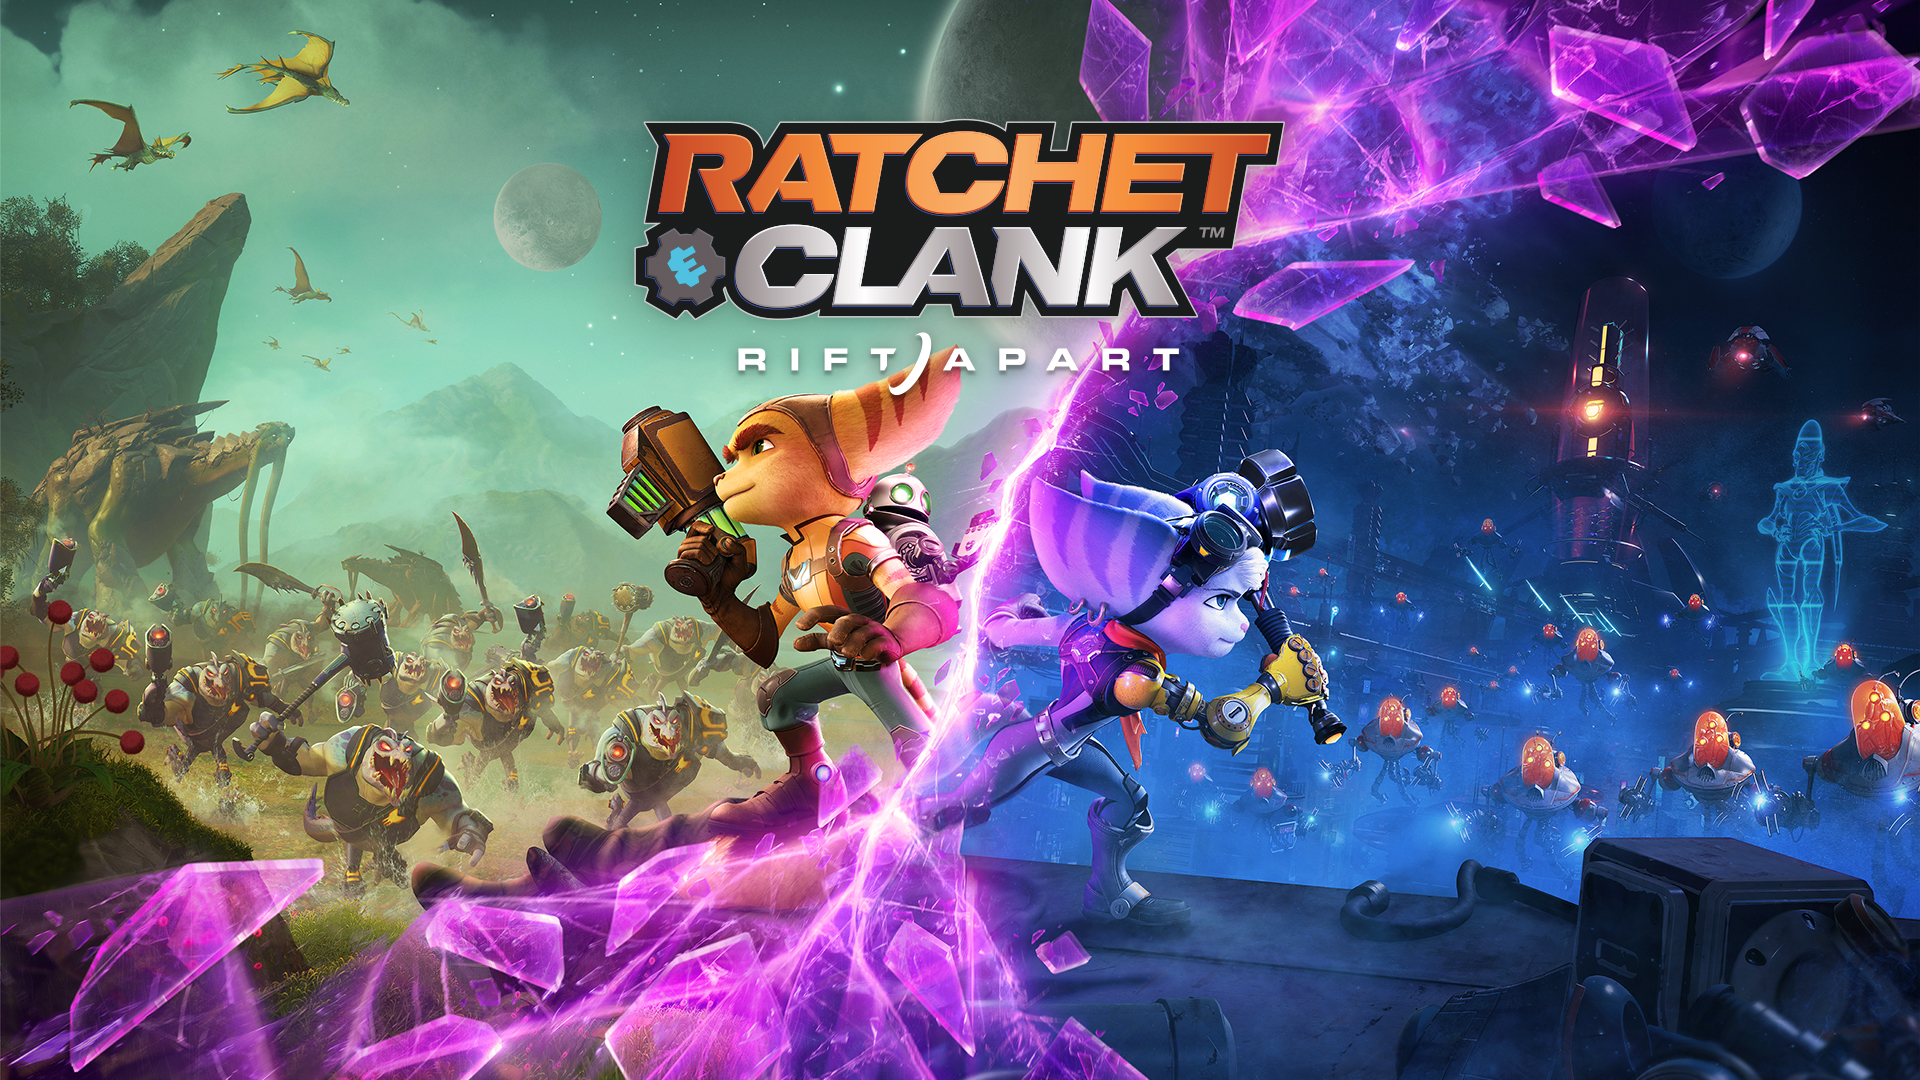 Ratchet and Rivet are standing in their own separate dimensions separated by a purple rift in the middle. Each are posing heroically with their weapons drawn and ready to fight the hordes of enemies surrounding them.